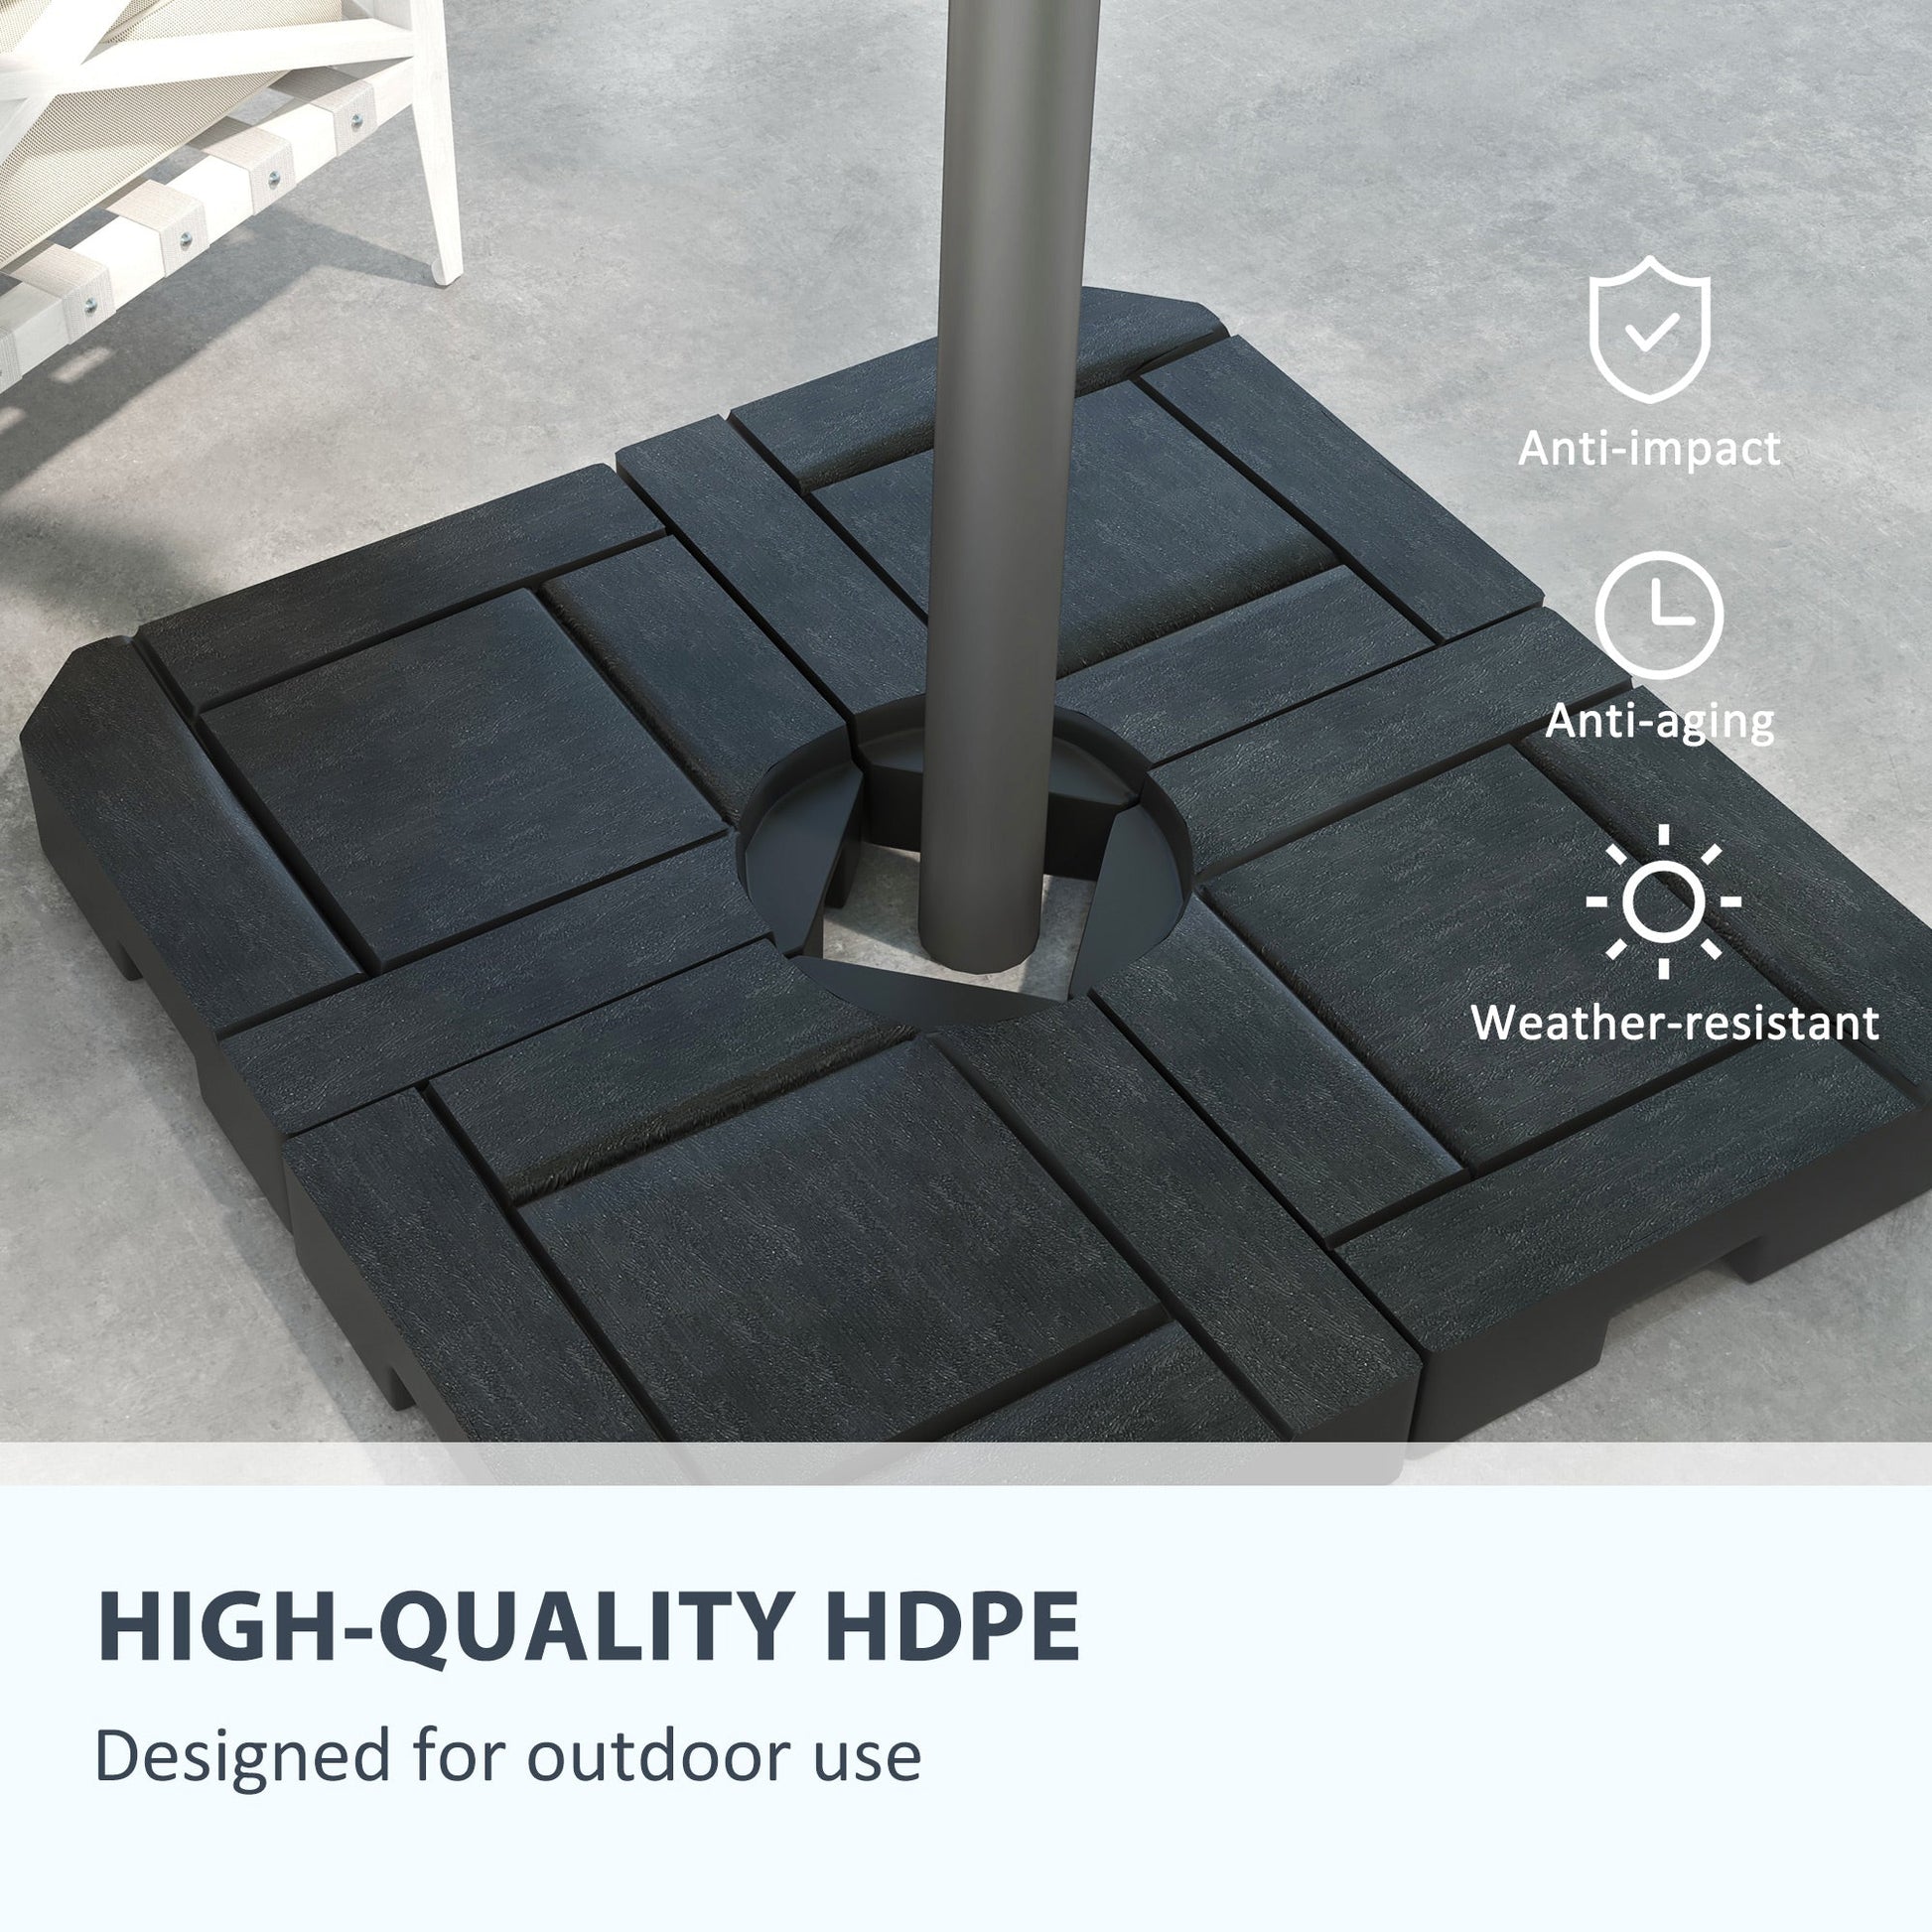 4PCs Patio Umbrella Base, Water or Sand Filled Cantilever Umbrella Weights for Cross Base with Handles, HDPE at Gallery Canada